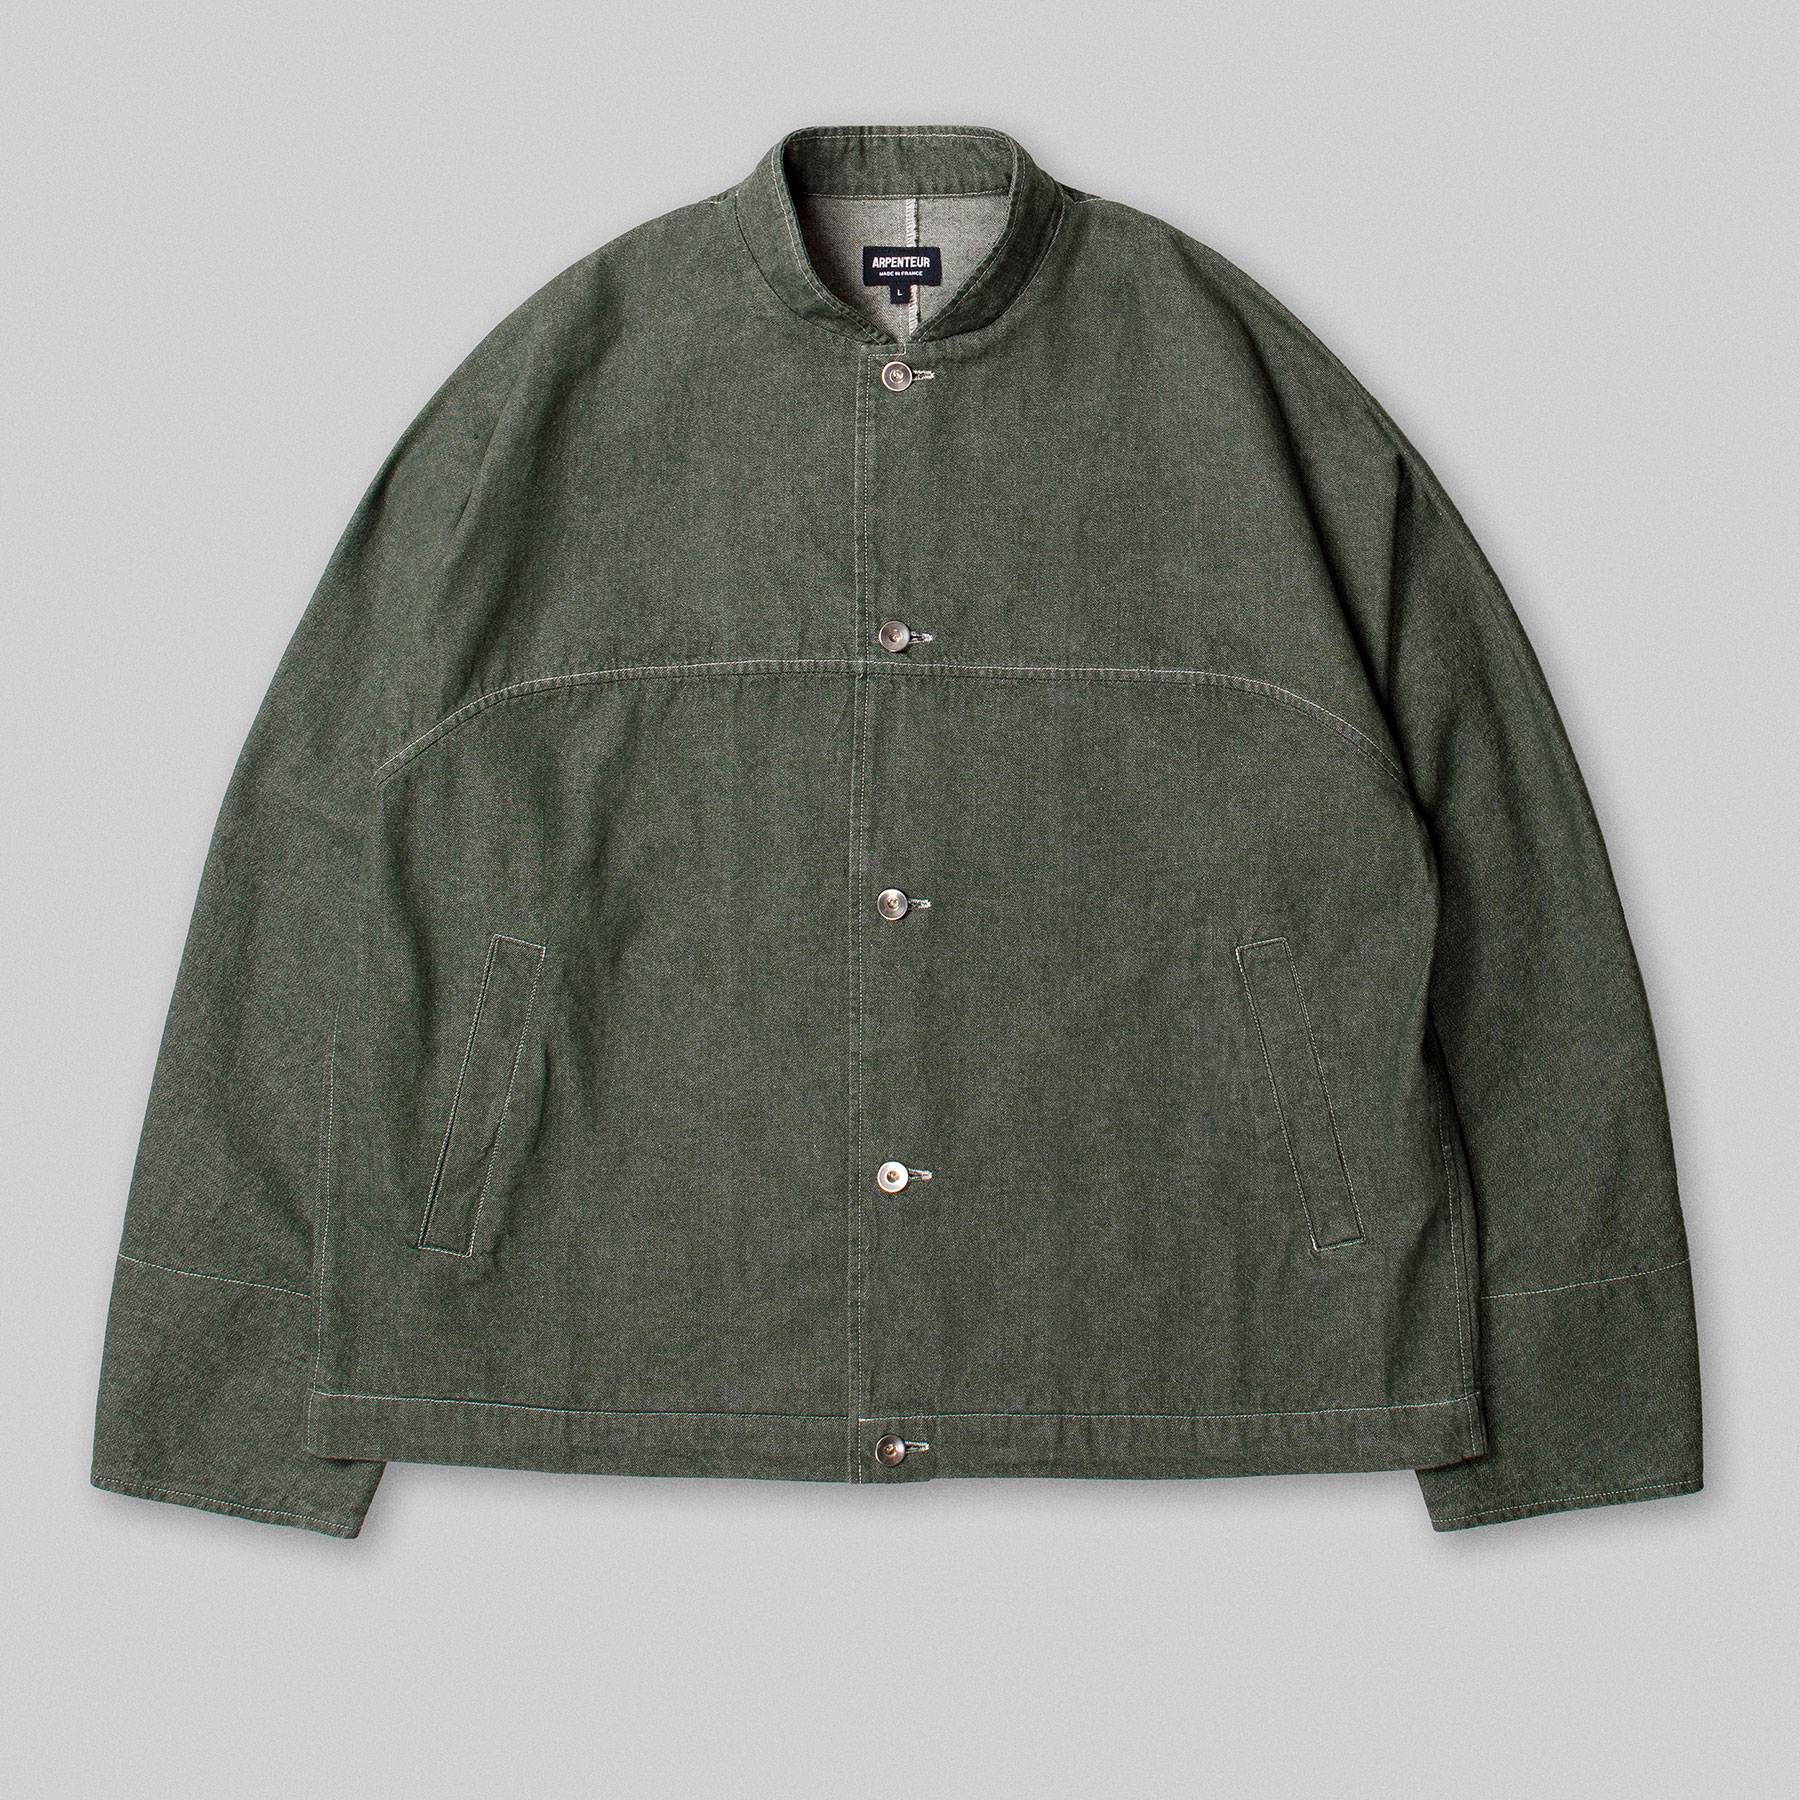 EVO Jacket by Arpenteur in Green color